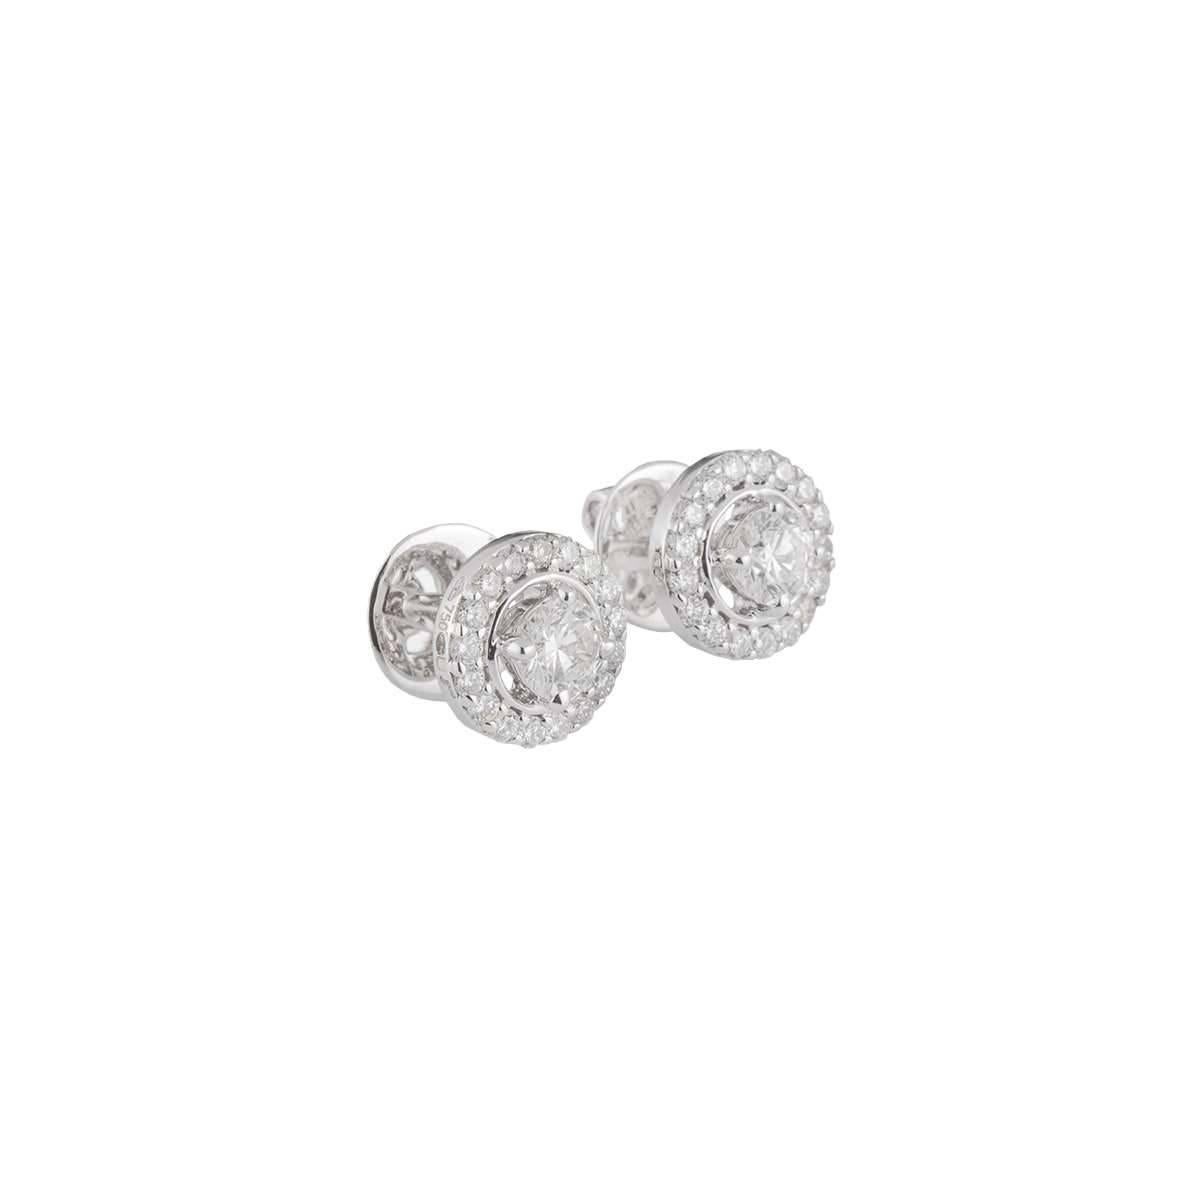 A beautiful pair of 18k white gold diamond earrings. The earrings have a round brilliant cut diamond single solitaire 0.84ct with a halo of 17 diamonds totalling approximately 0.55ct all with colour H-I and VS-SI clarity. The earrings have a gross